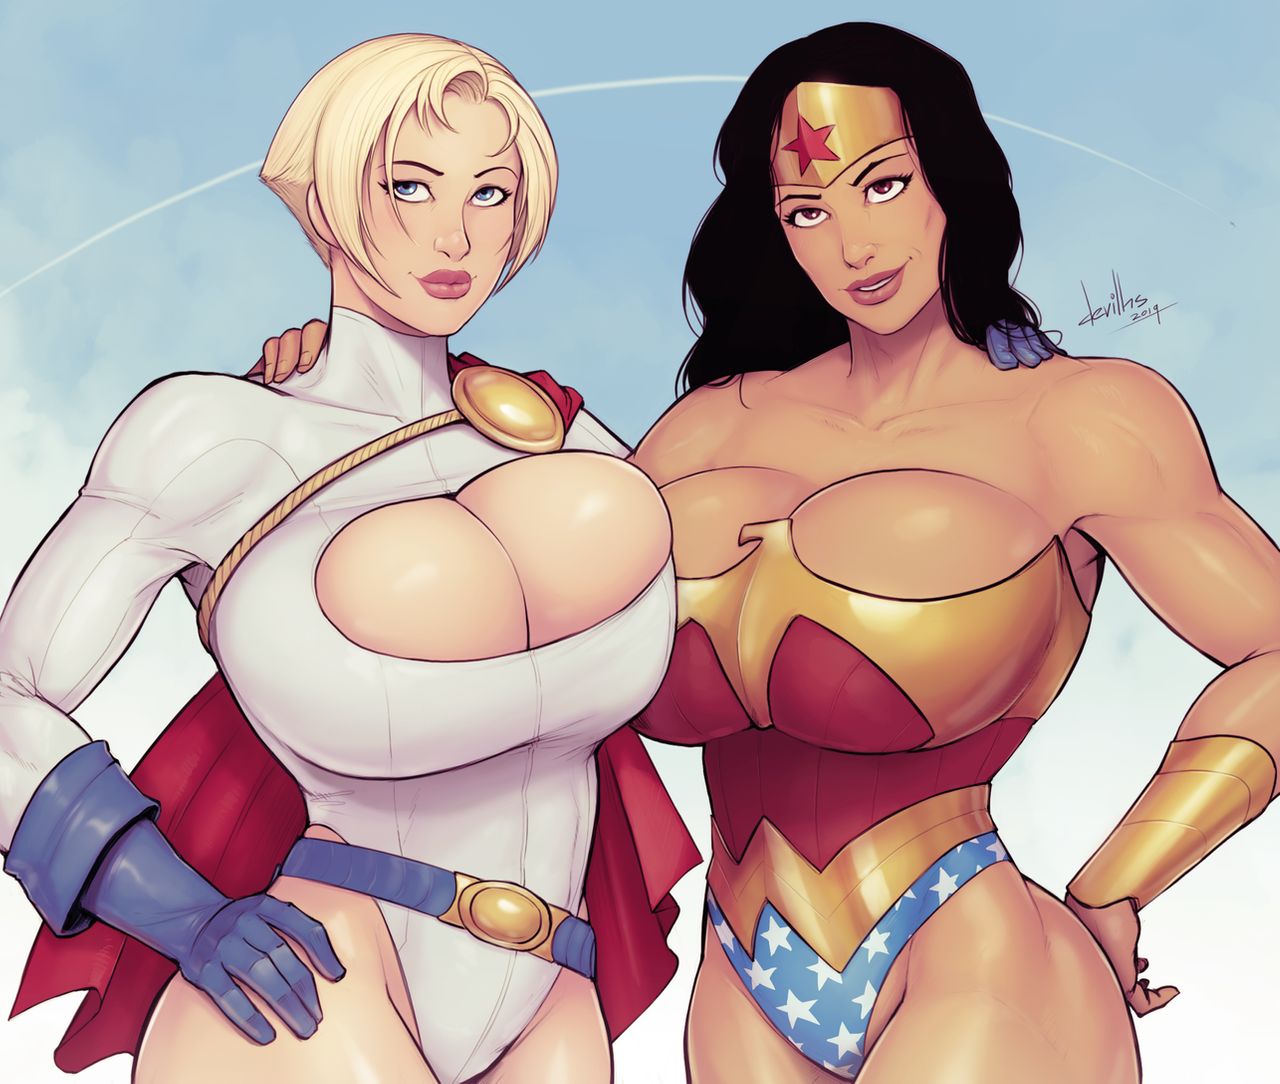 Power Girl and Wonder Woman, by devilhs.